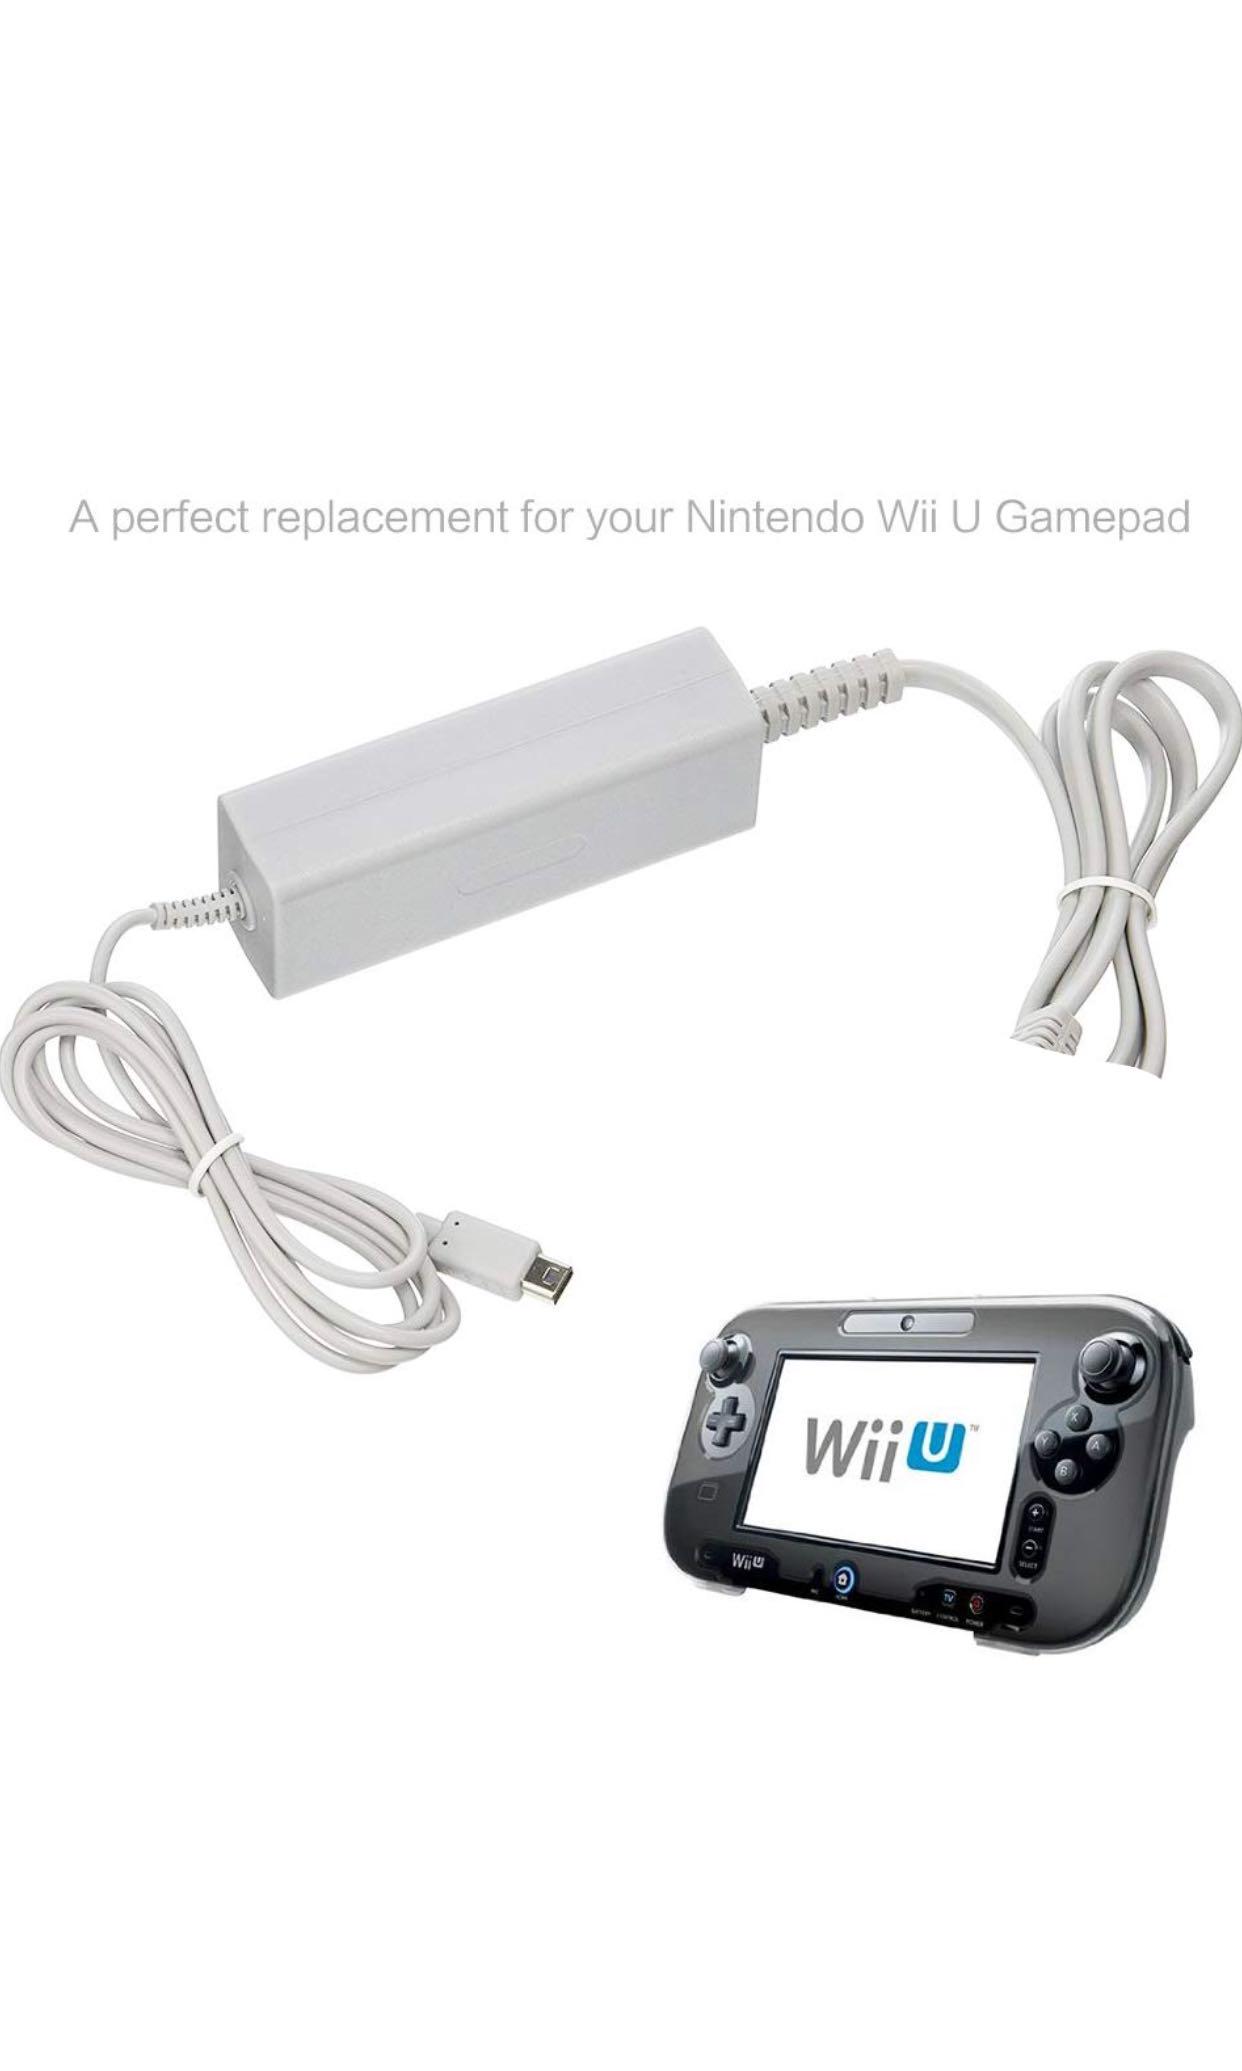 286 Wii U Gamepad Charger Ac Power Supply Adapter Charger Cable For Nintendo Wii U Gamepad Remote Controller 3 Pin Plug Video Gaming Gaming Accessories Cables Chargers On Carousell